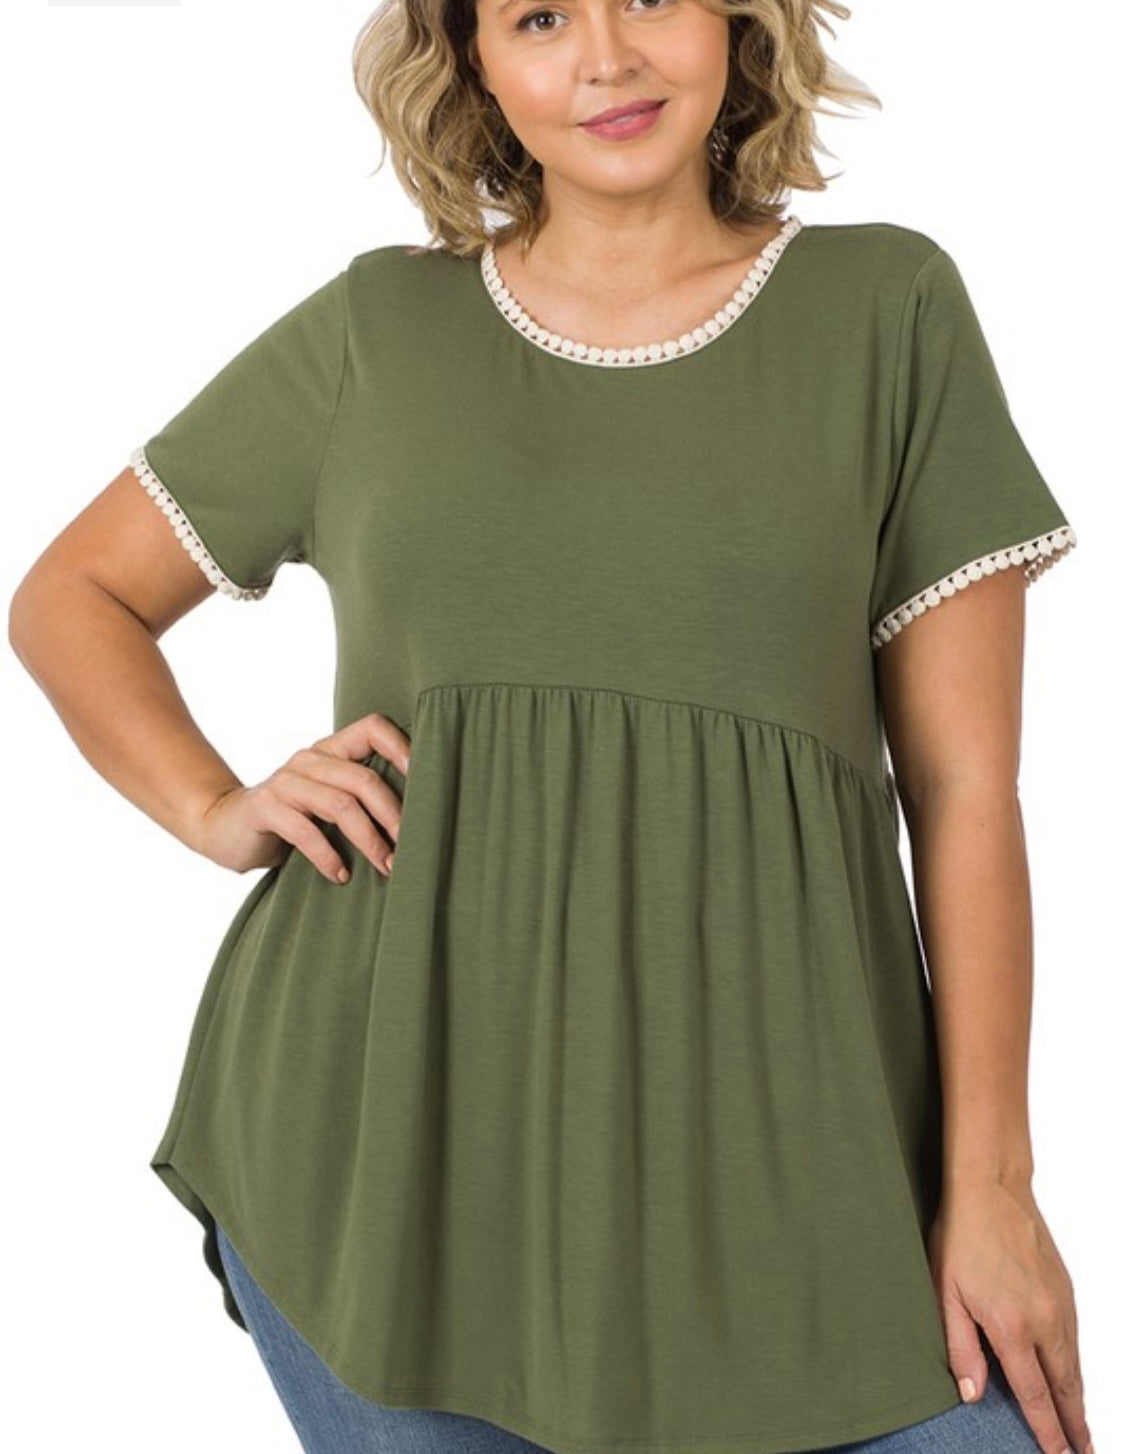 Zenana Olive Green with Trim Short Sleeve Top